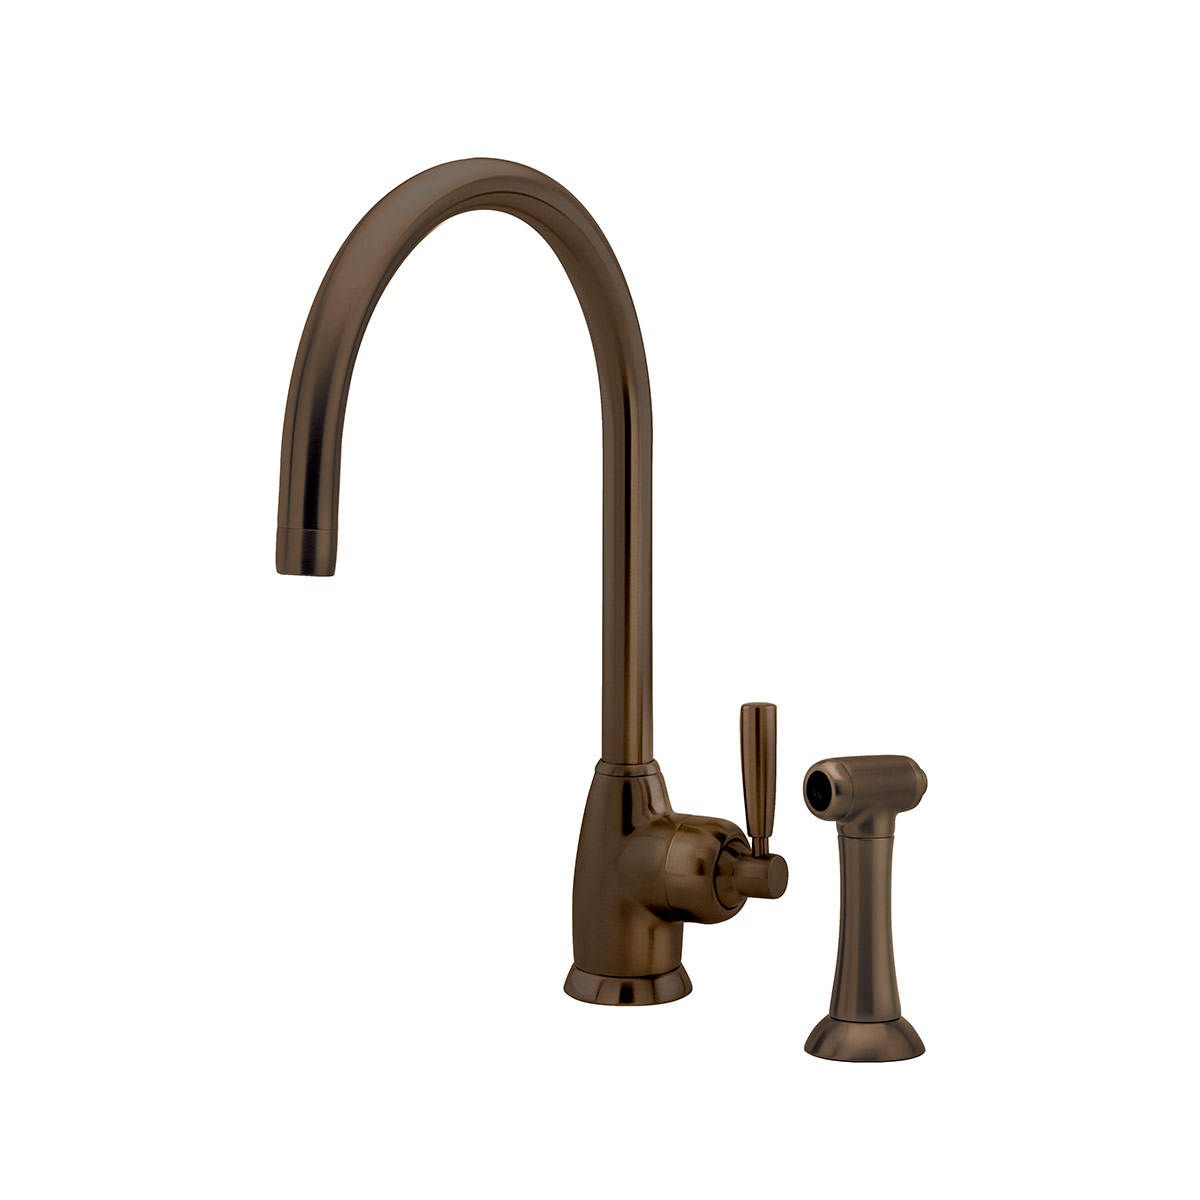 Shaws by Perrin & Rowe Roeburn kitchen mixer with spray rinse in English Bronze. Mimas style monobloc kitchen tap AUSH.4846. Distributed in Australia by Luxe by Design, Brisbane.